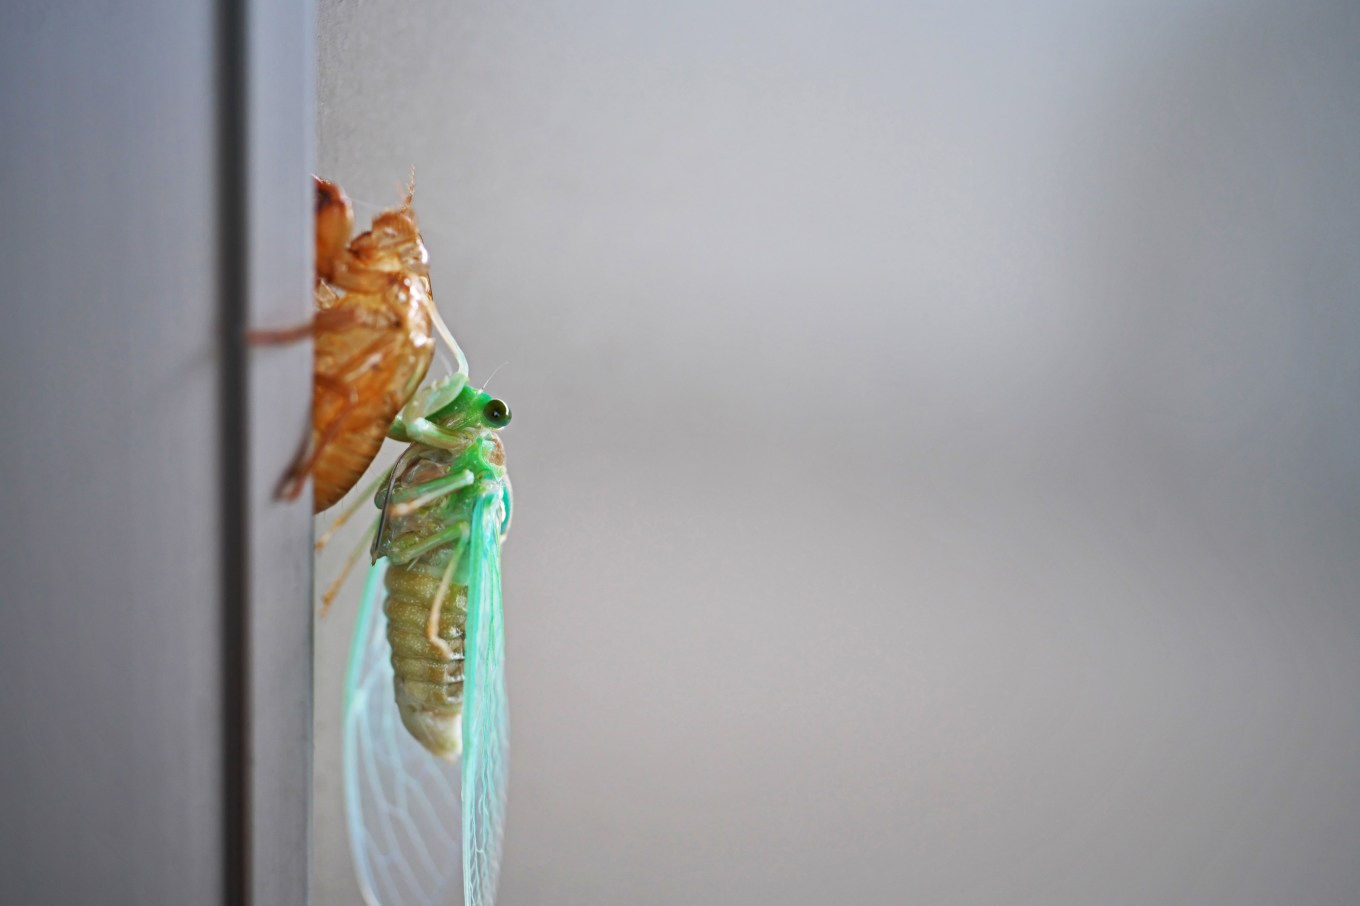 A close-up picture of a cicada molting.